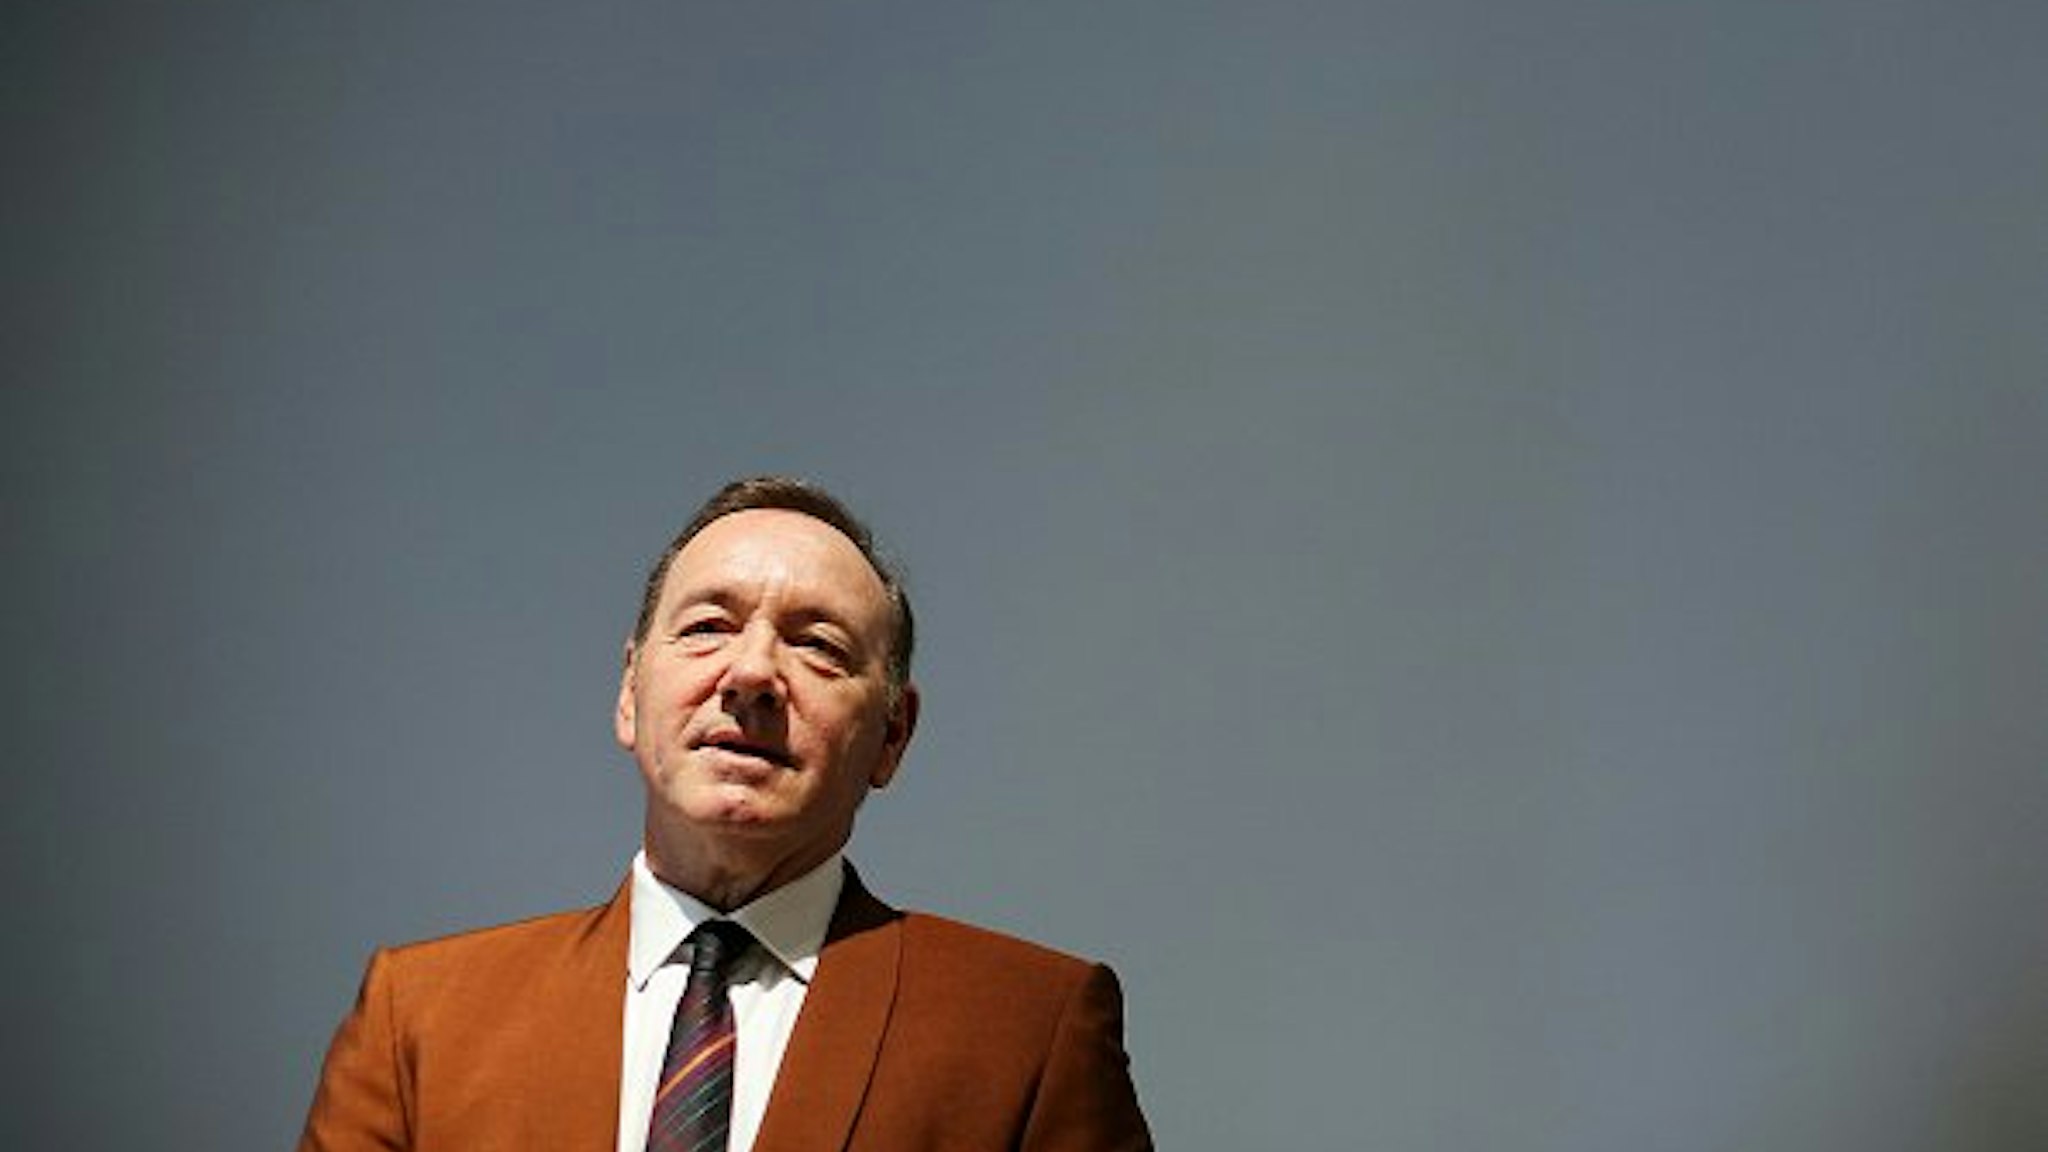 Actor Kevin Spacey attends the reading of the event "The Boxer - La nostalgia del poeta"